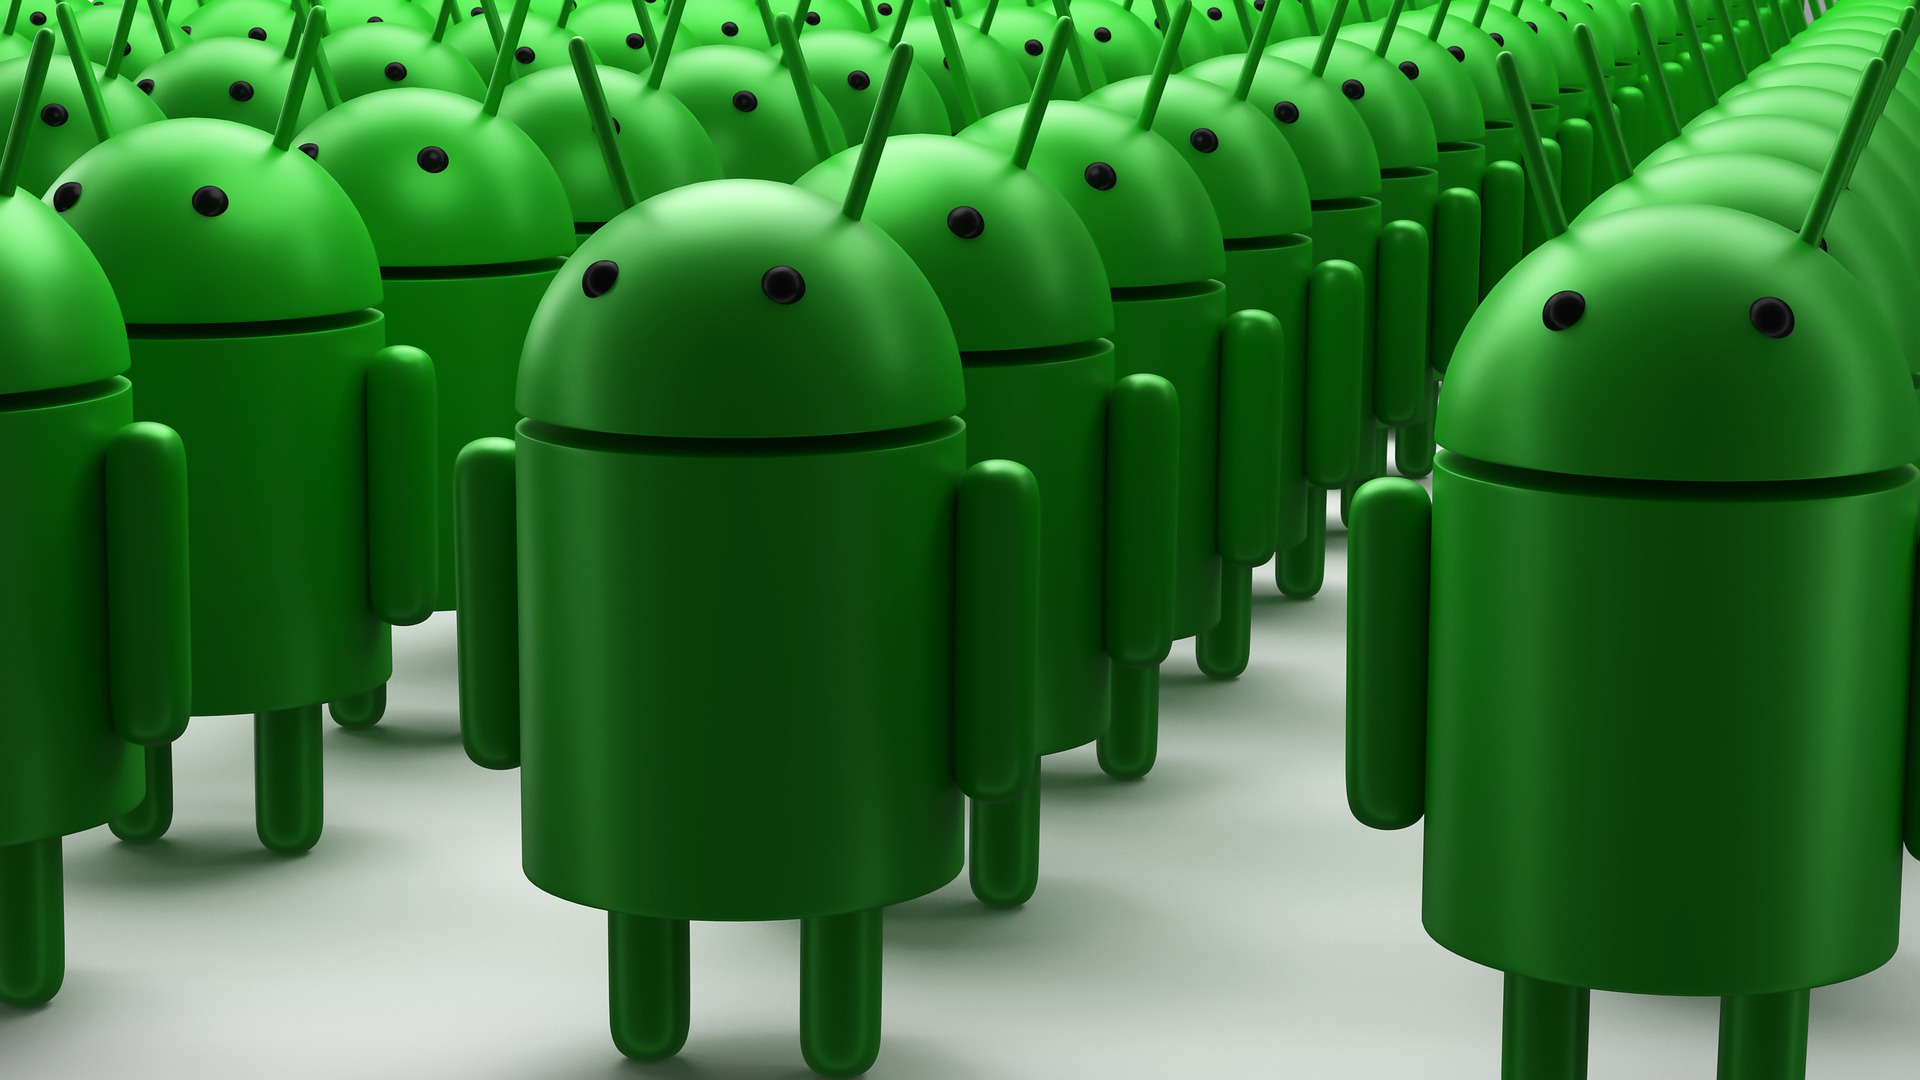 StrandHogg vulnerability threatens 500 of the most popular Android apps